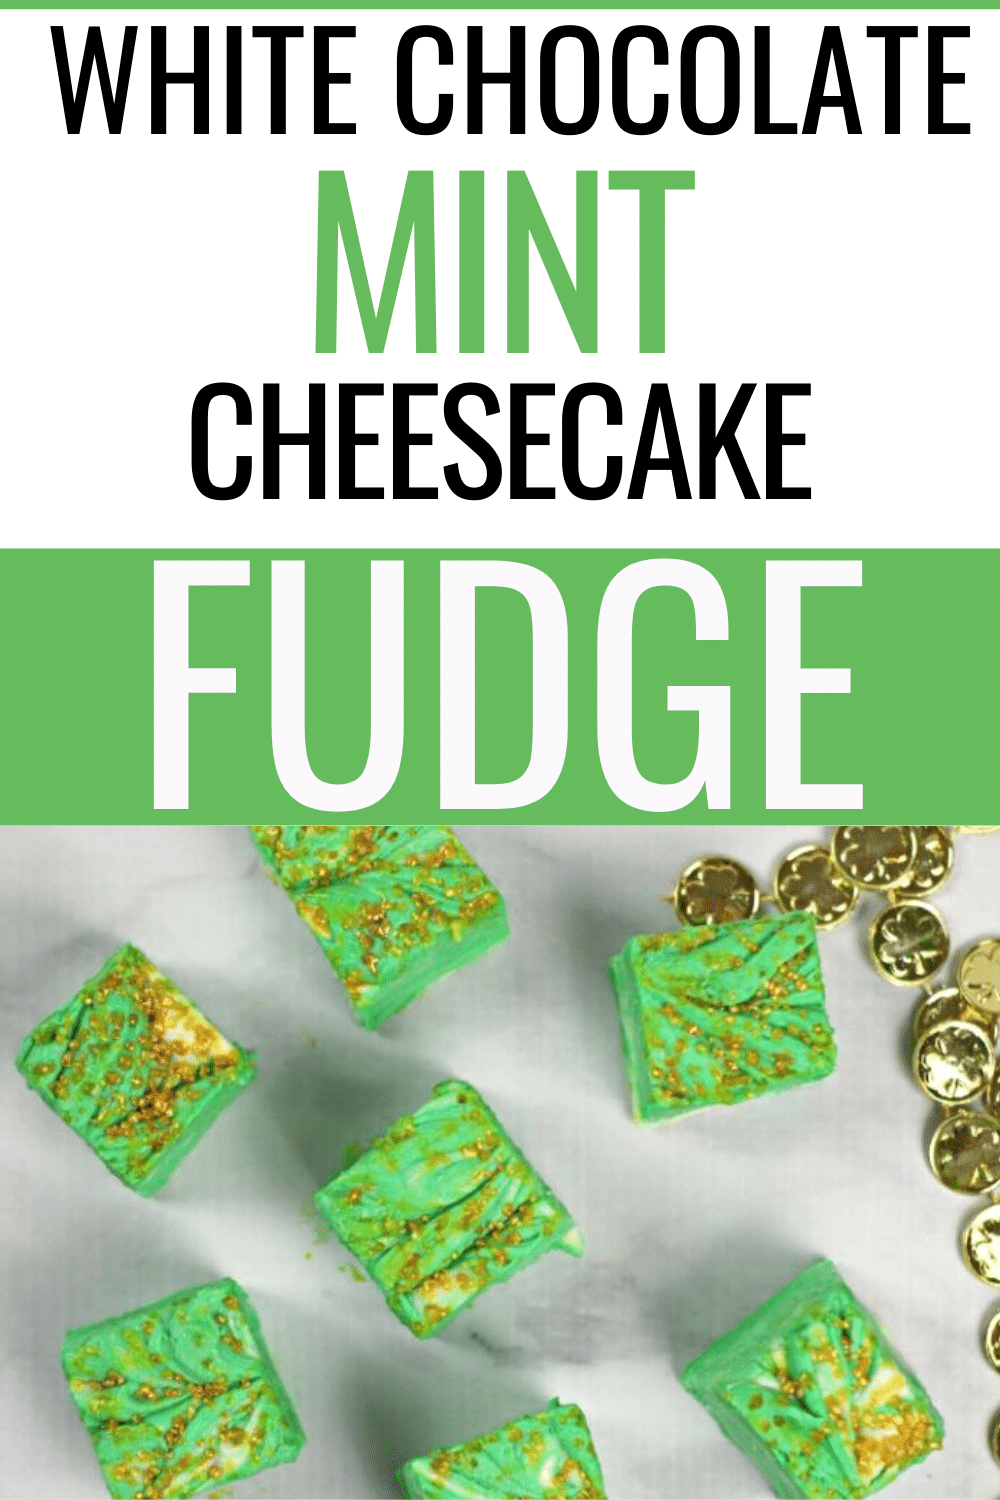 This white chocolate mint cheesecake fudge is a simple no bake cheesecake recipe that has a creamy smooth texture and big minty flavor. #fudge #cheesecake #whitechocolate #mint #recipe via @wondermomwannab